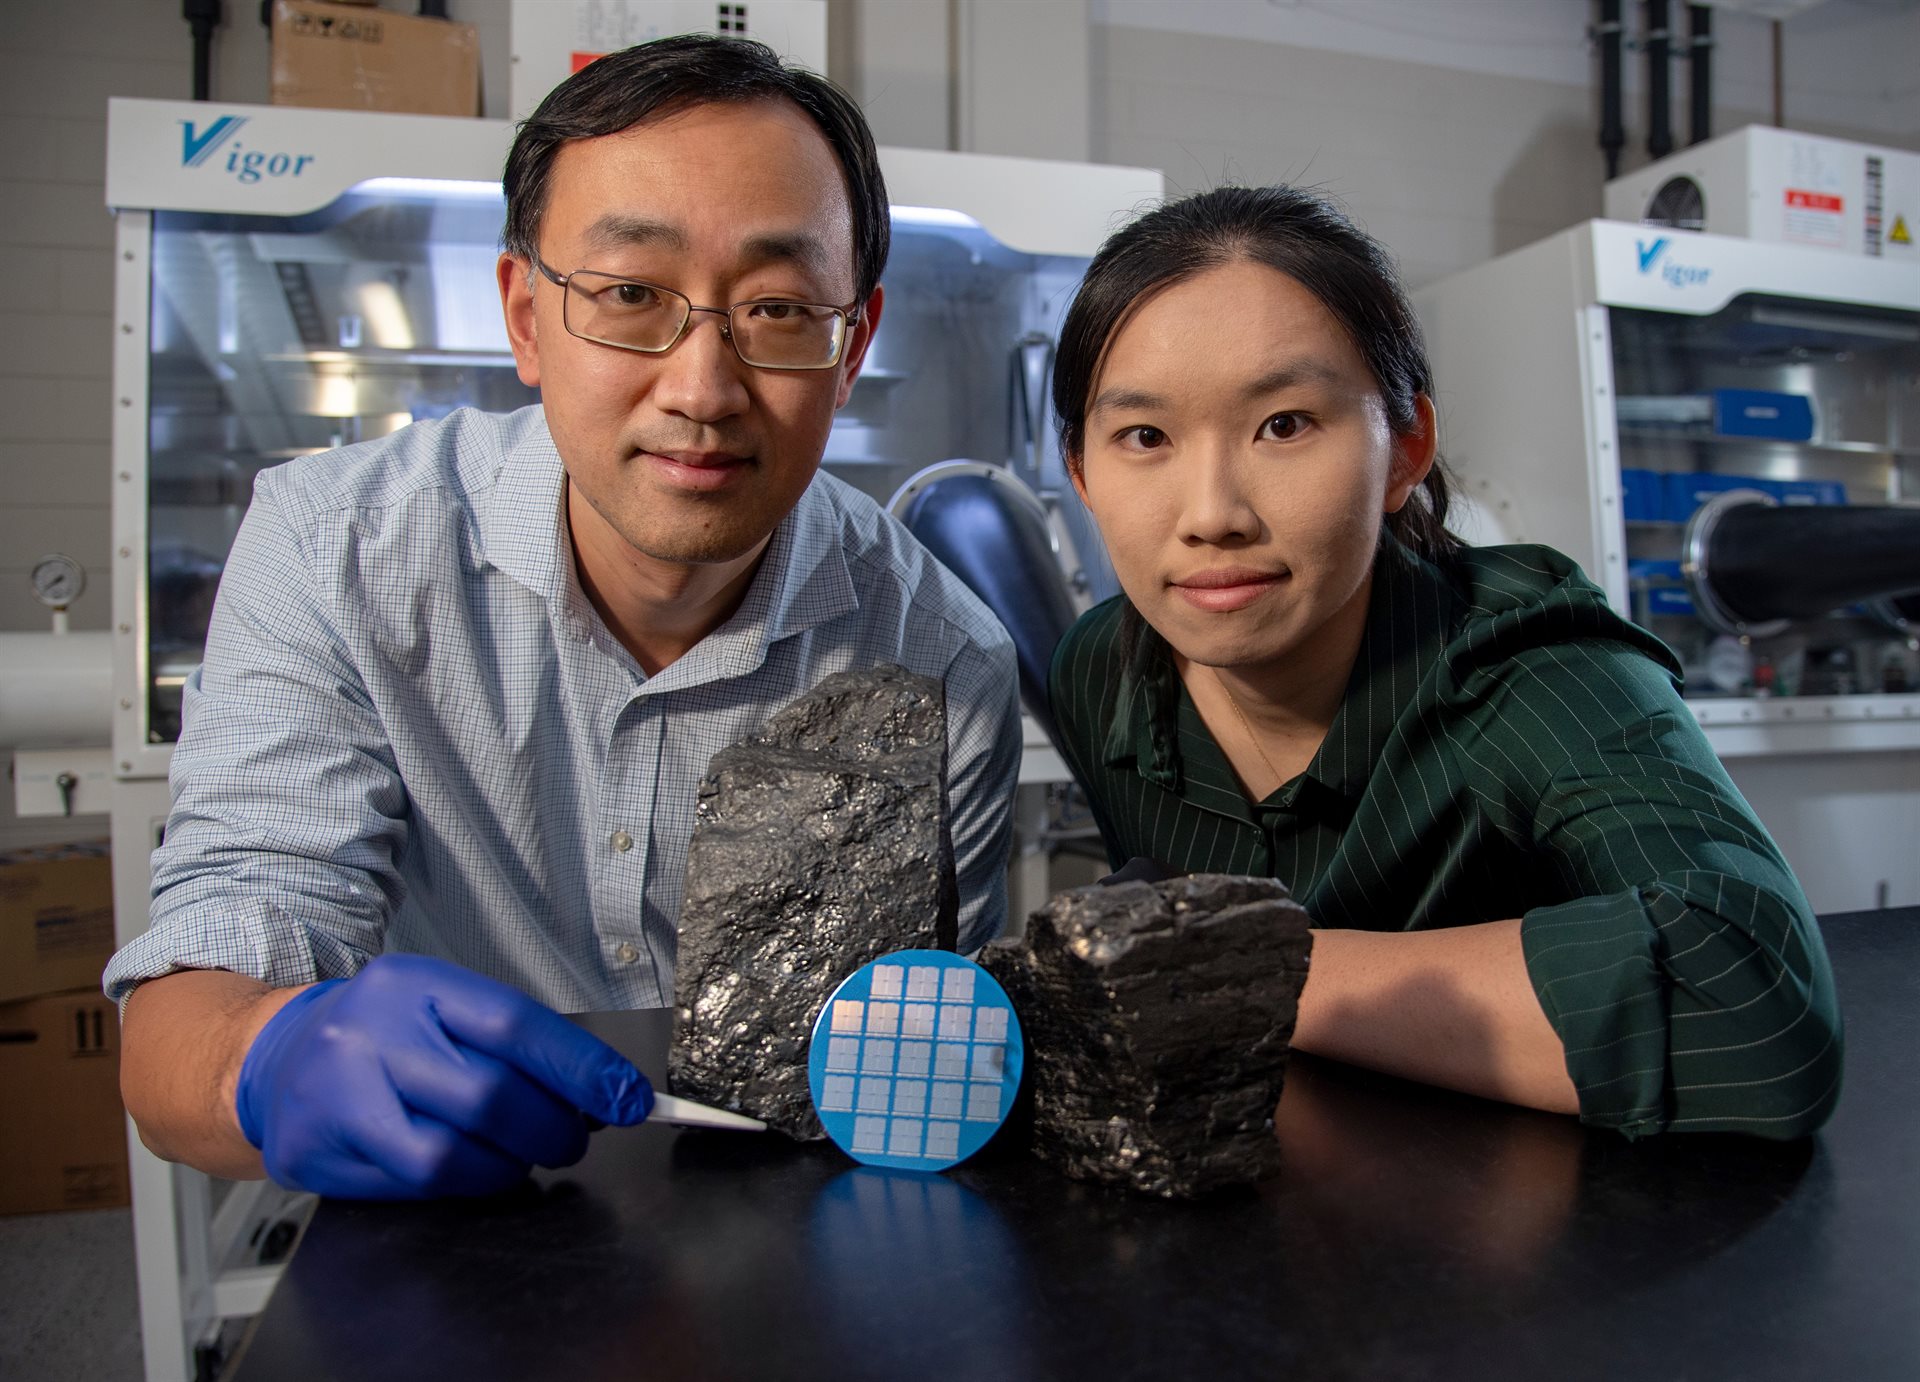 A research team from U of I is turning coal into electronic devices